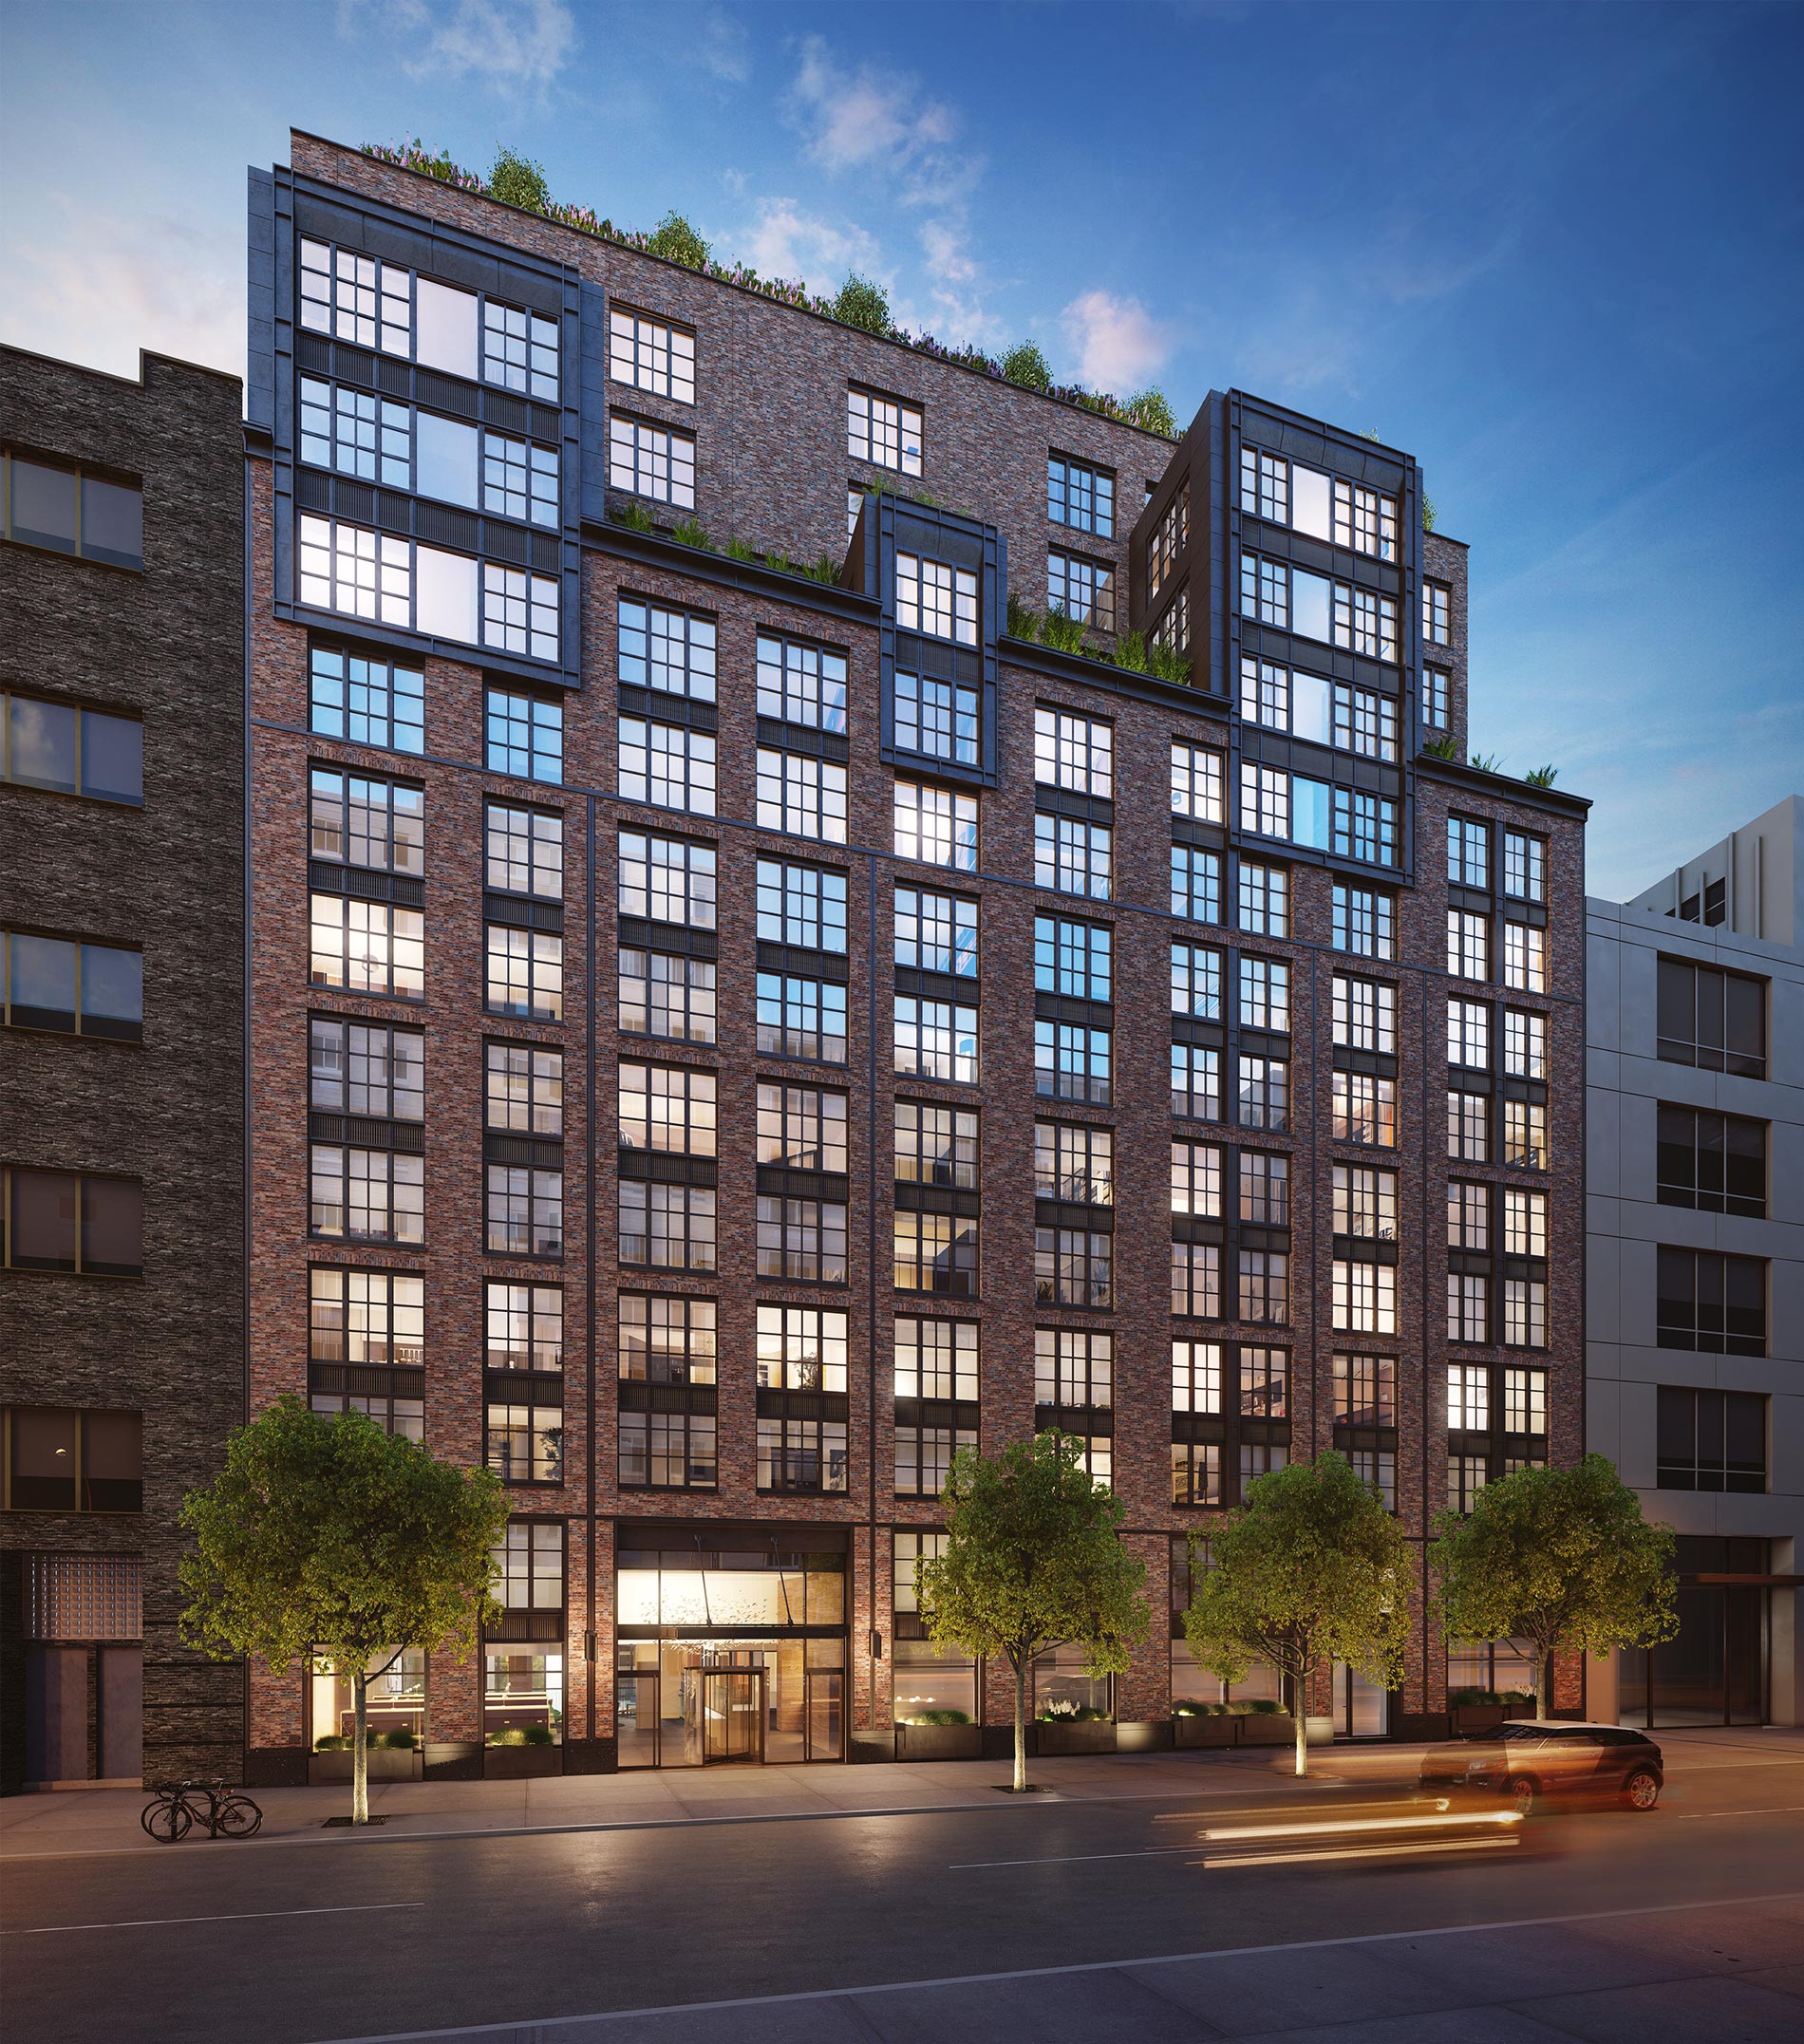 Architectural Rendering of the exterior of the 535 West 43rd Street project located in Hell’s Kitchen, New York City